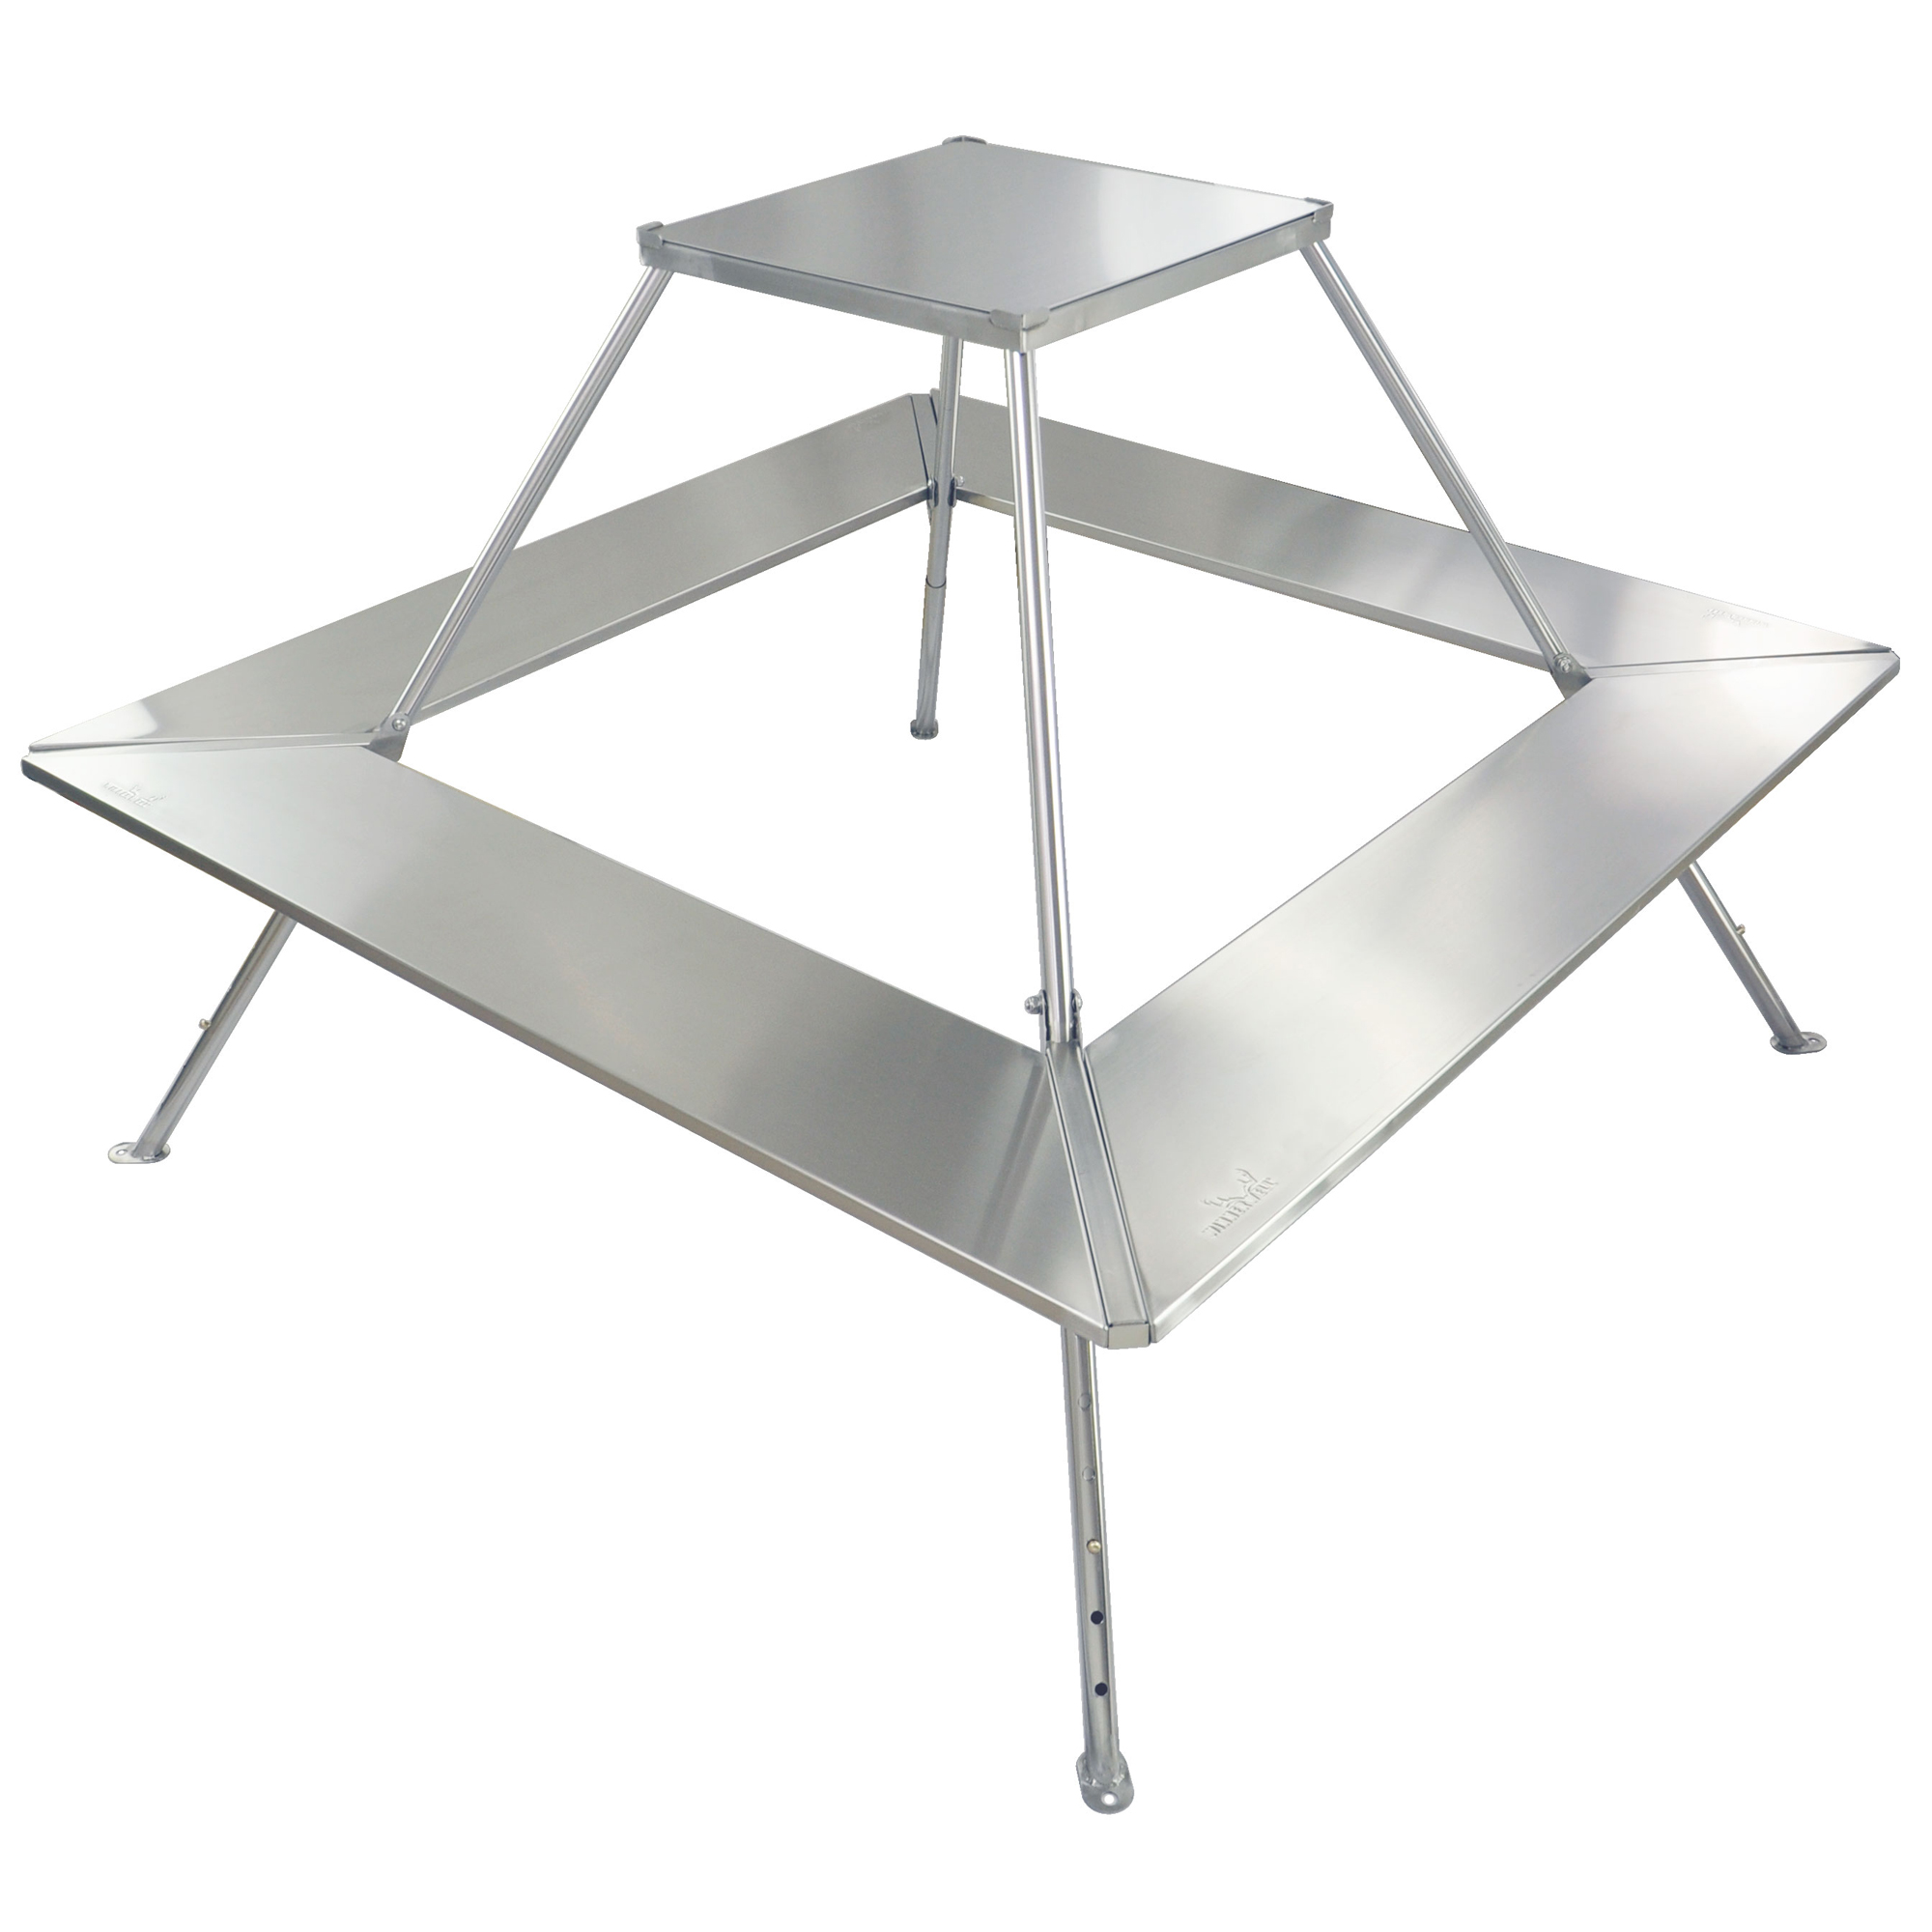 Durable And Efficient table inox 